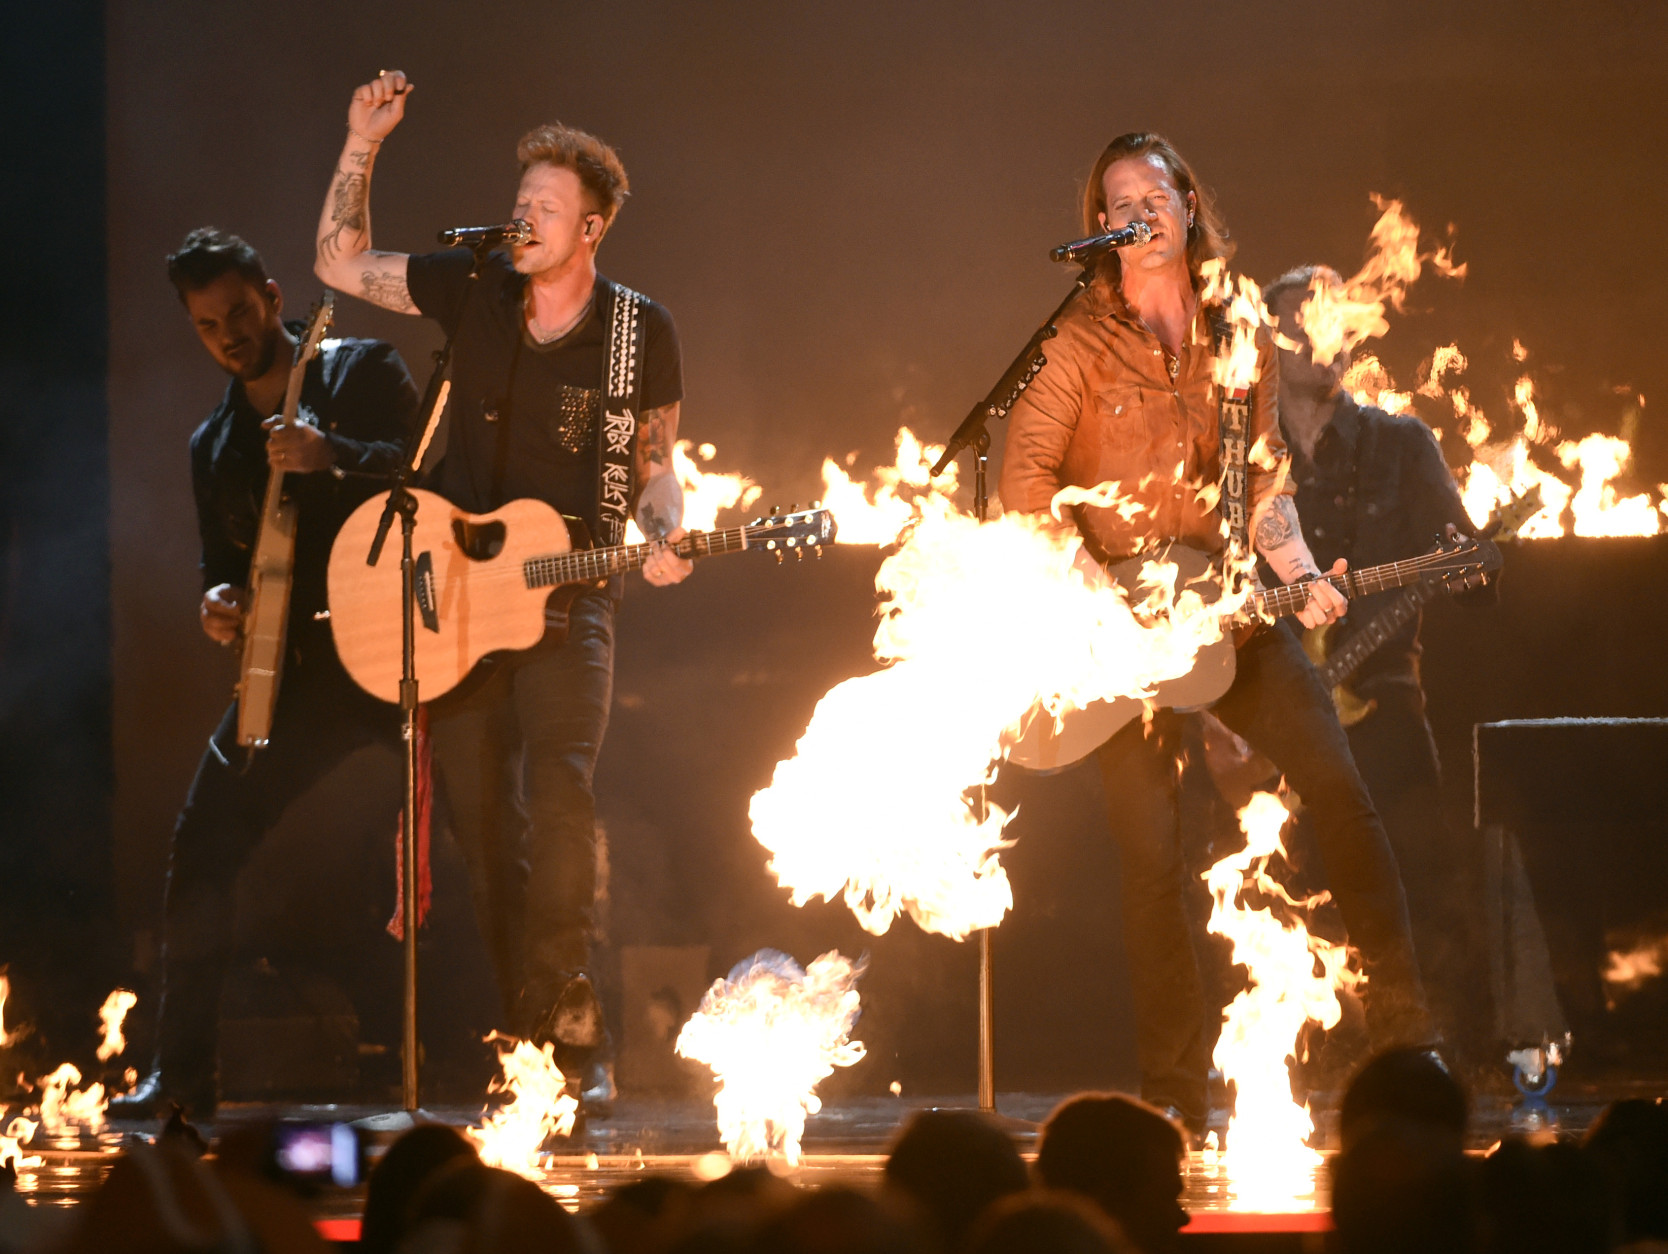 Brian Kelley, left, and Tyler Hubbard, of Florida Georgia Line, perform at the 50th annual Academy of Country Music Awards at AT&amp;T Stadium on Sunday, April 19, 2015, in Arlington, Texas. (Photo by Chris Pizzello/Invision/AP)